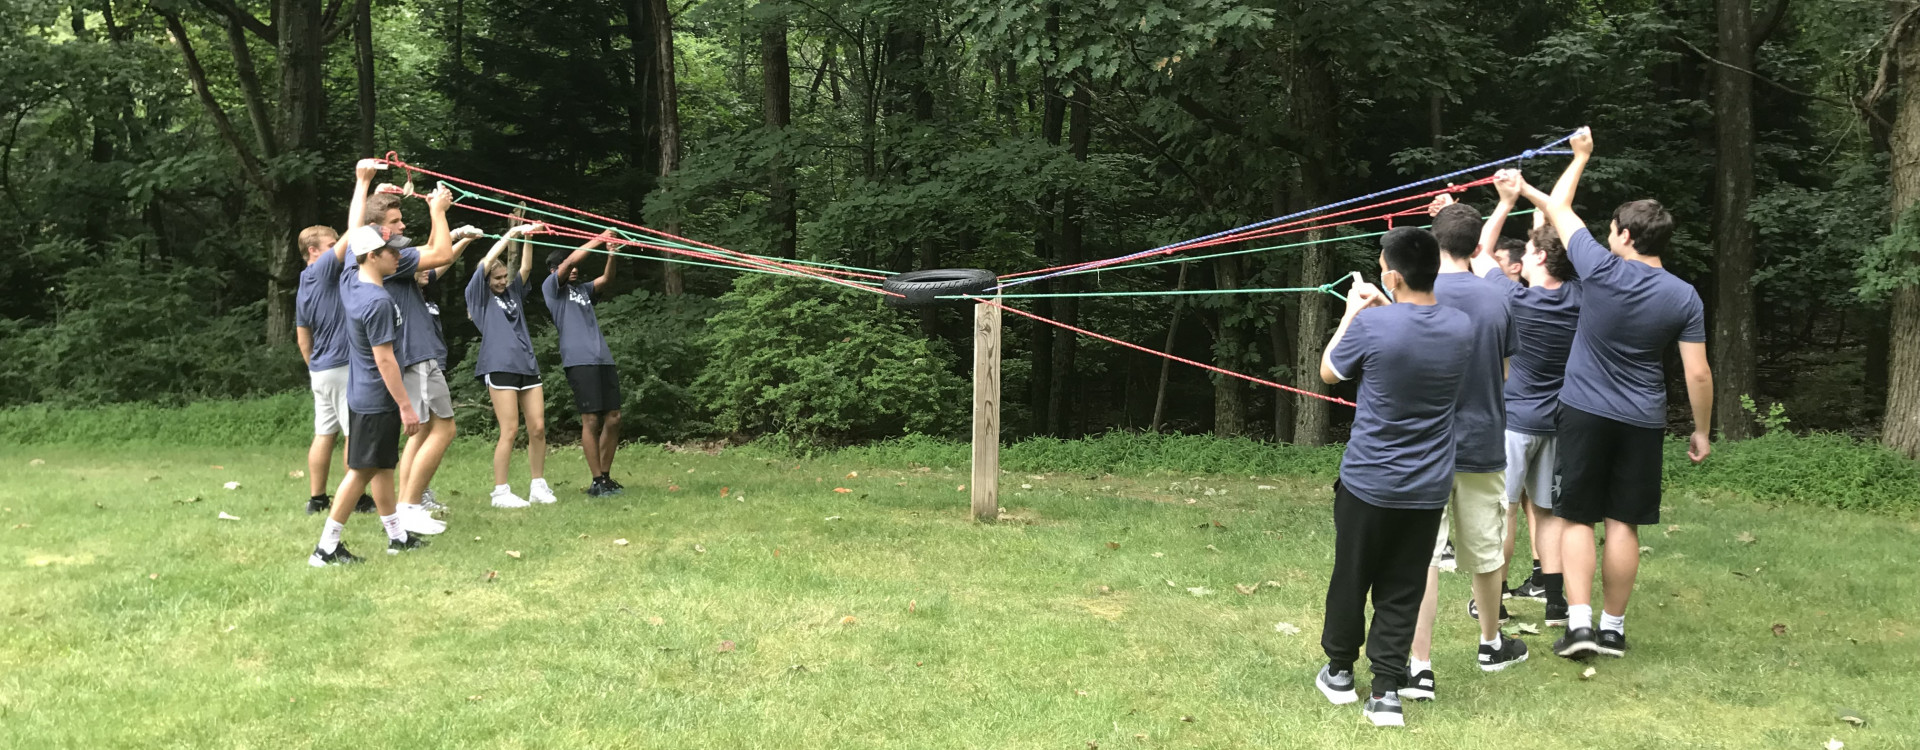 Discover Lehigh students participating in the ropes course